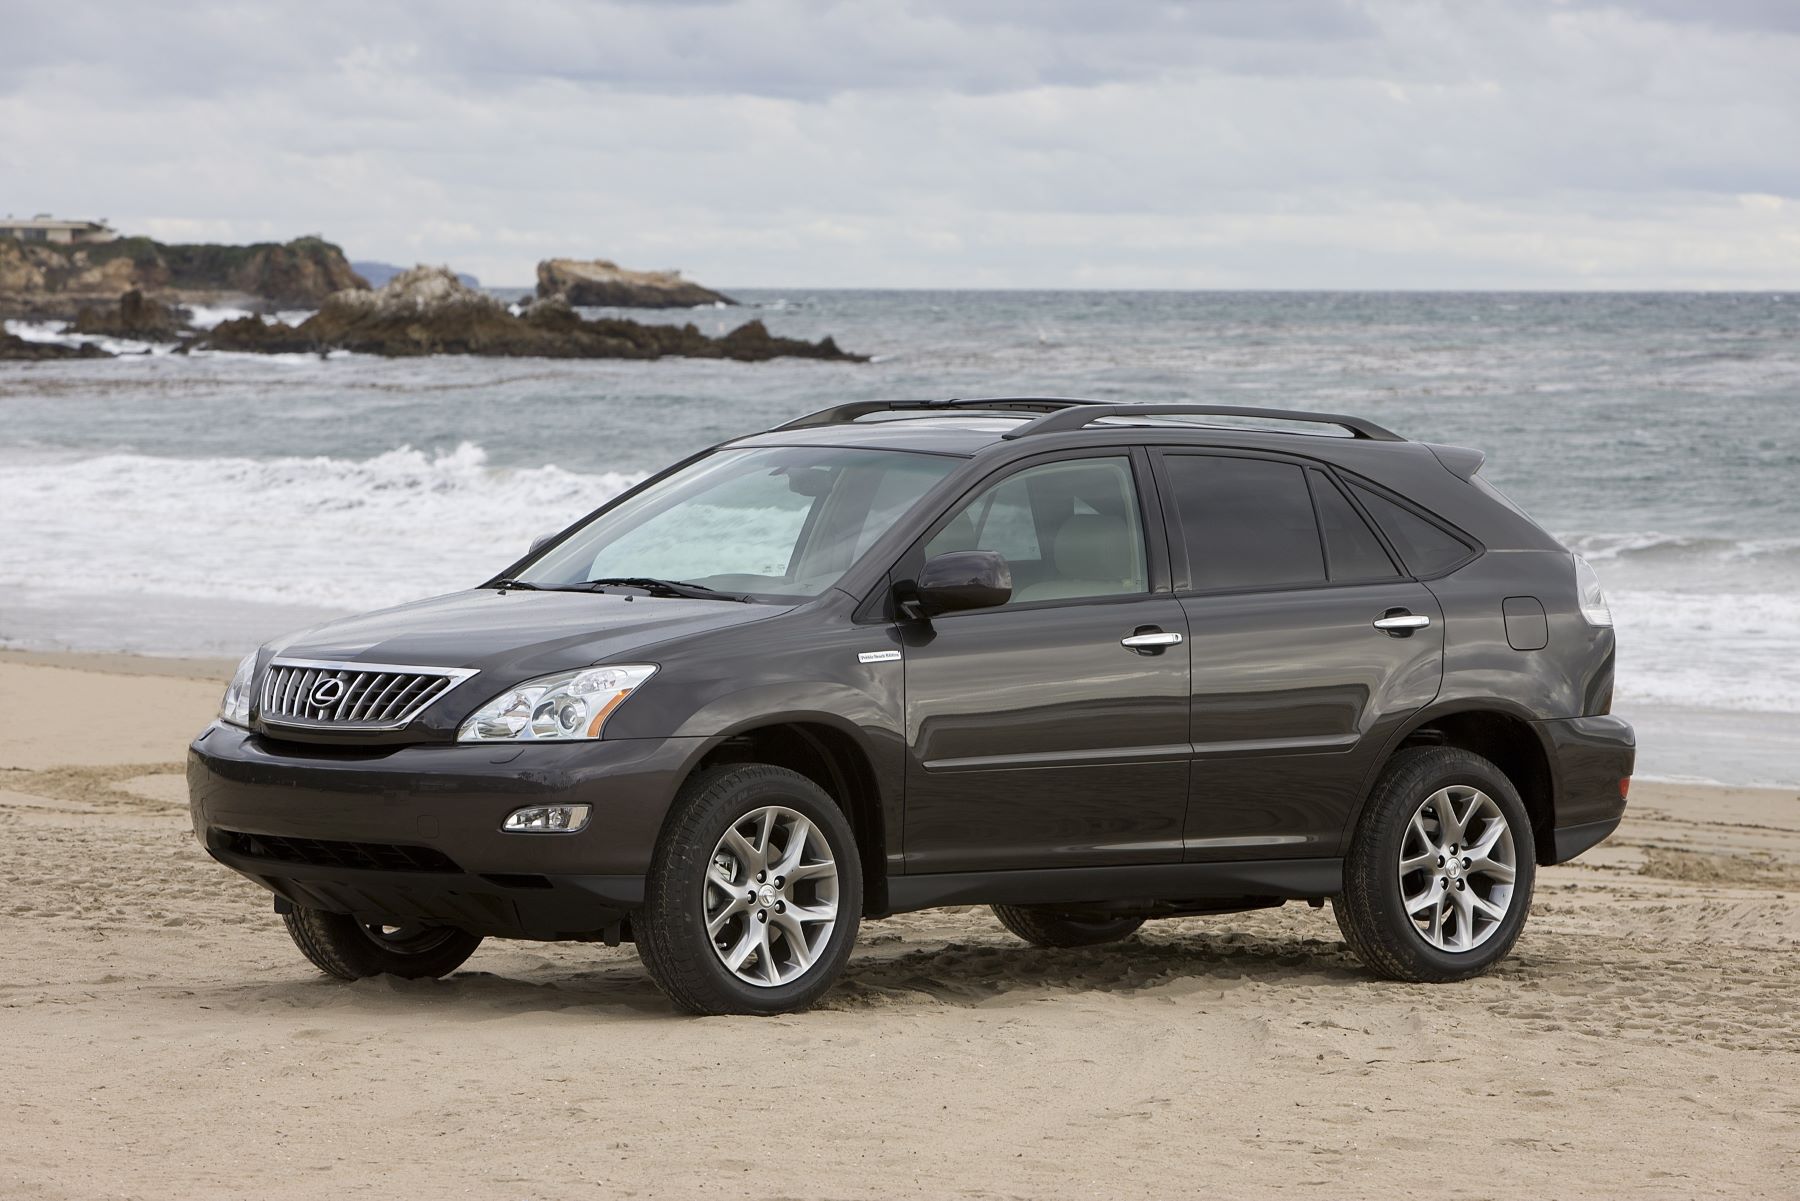 A 2008-2009 Lexus RX 350 Pebble Beach Edition model parked on a sandy beach near sea waves. This is one of the most reliable used SUVs to buy.